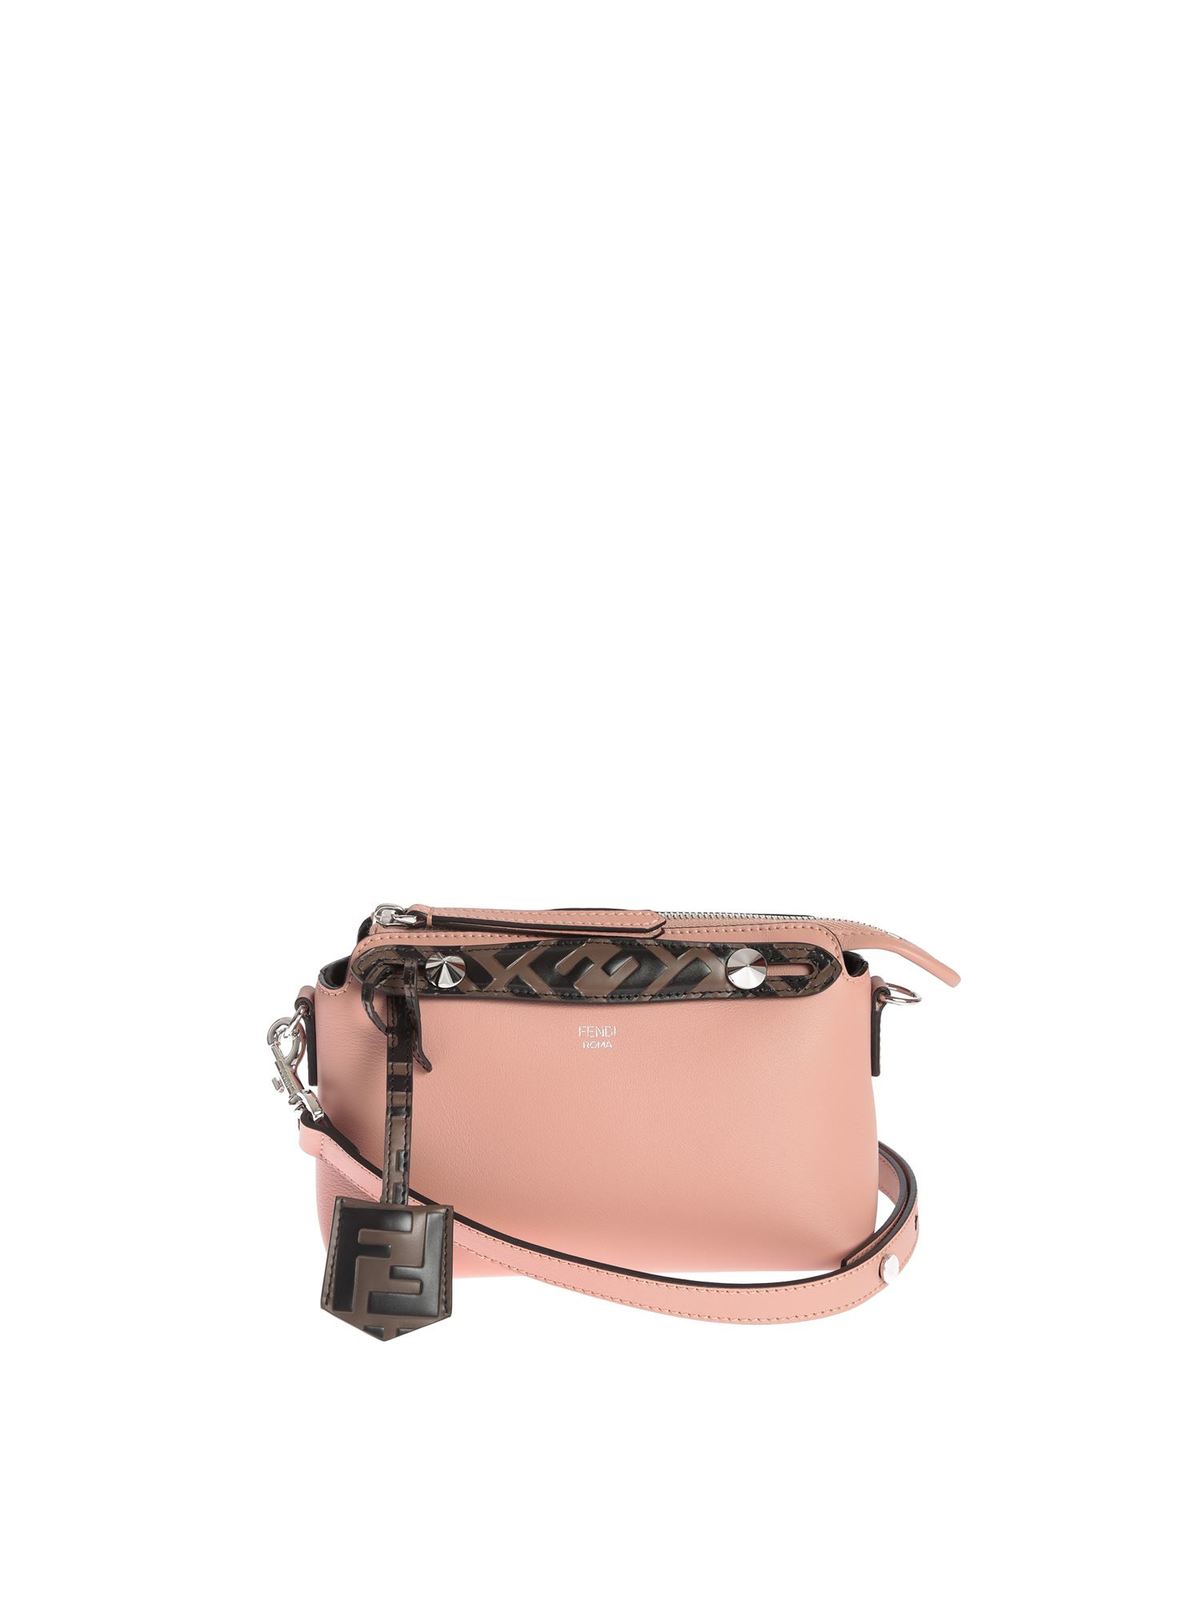 FENDI BY THE WAY MINI BAG IN PINK